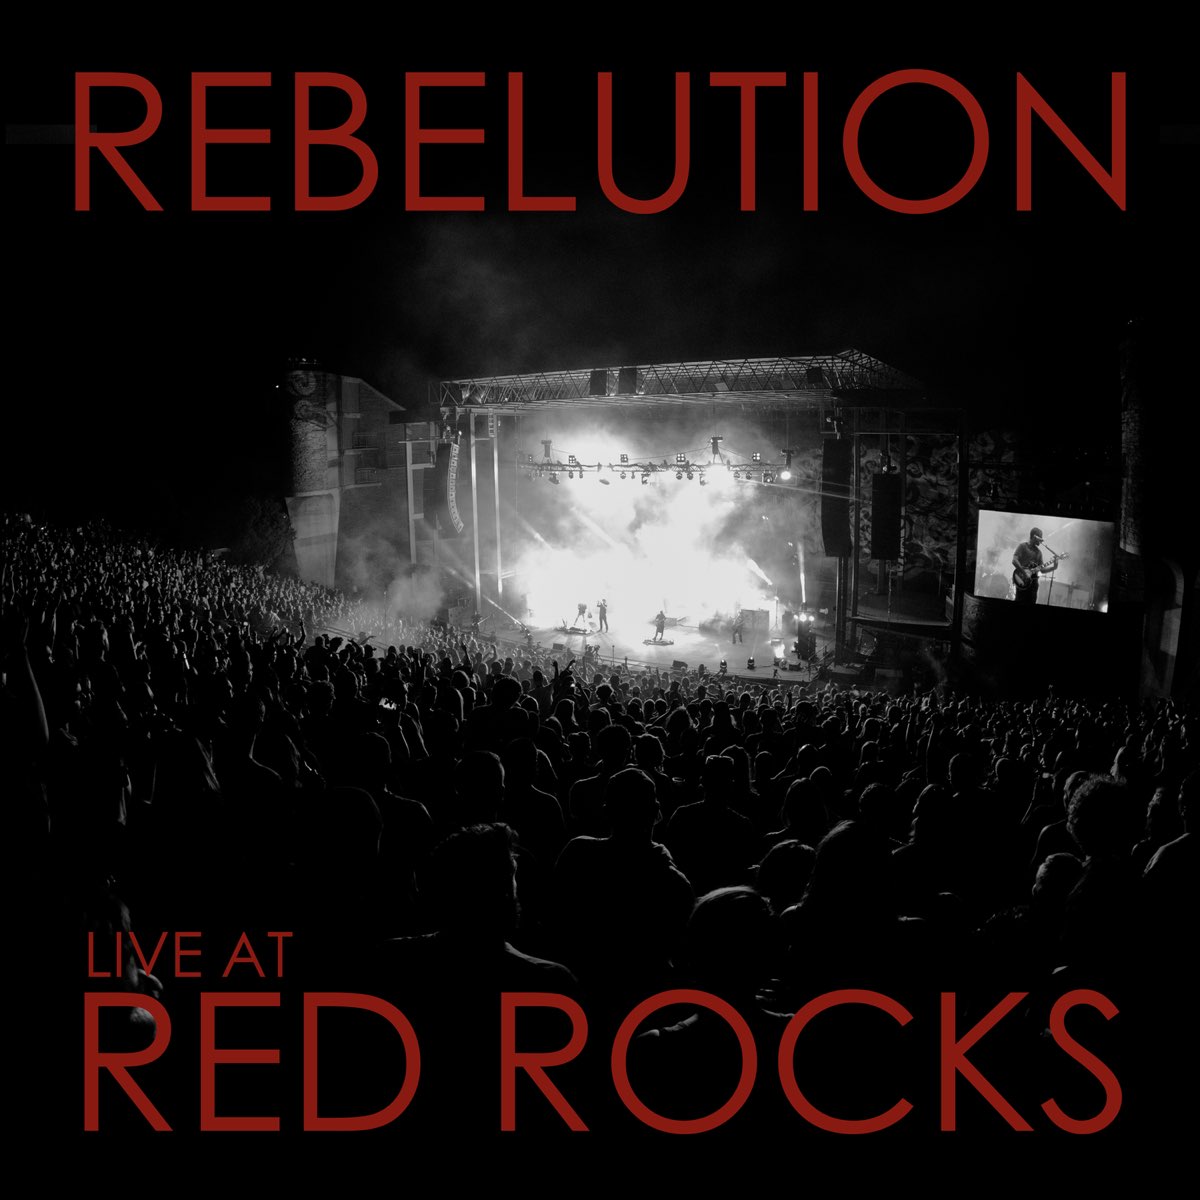 ‎Live at Red Rocks by Rebelution on Apple Music